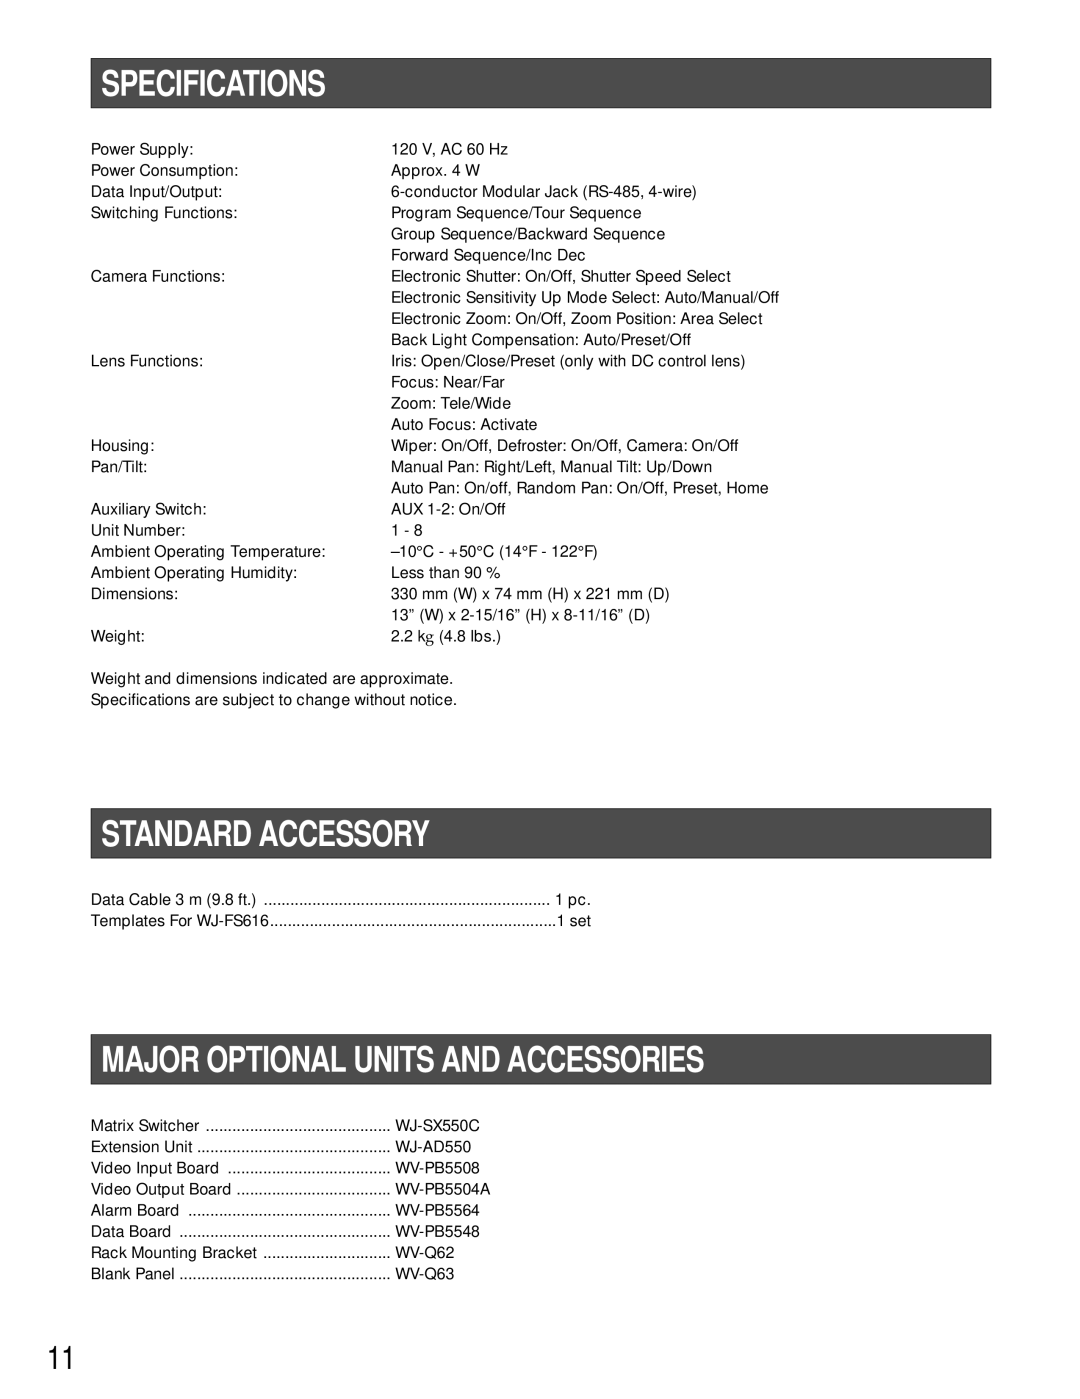 Panasonic WV-CU550C Specifications, Standard Accessory, Major Optional Units And Accessories, WV-PB5504A 